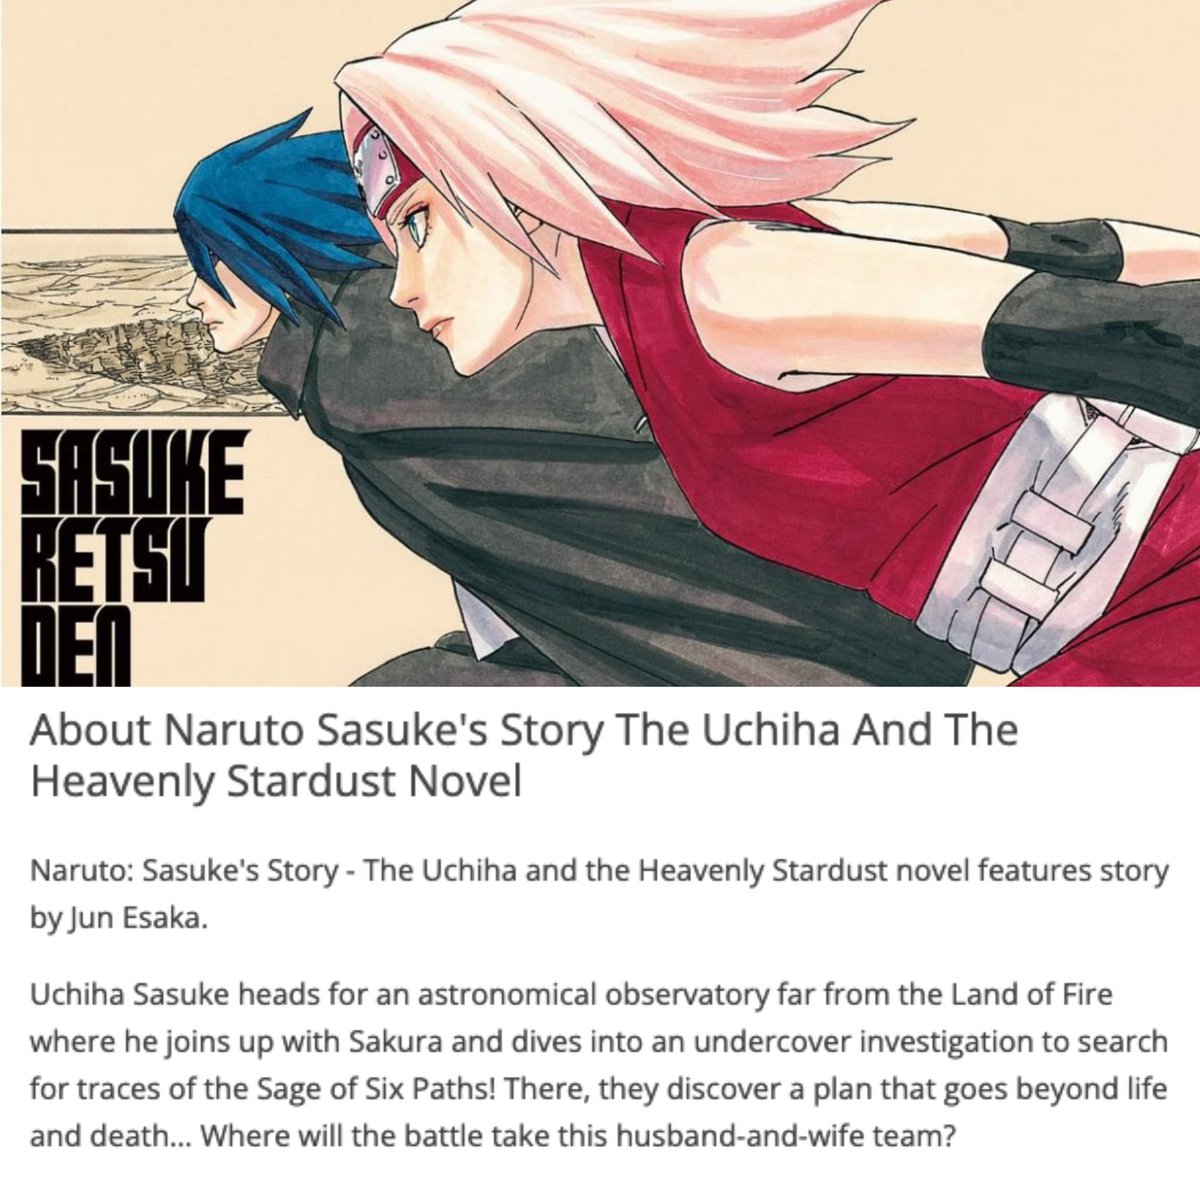 Back in October 2021 VIZMEDIA announced that the Retsuden Novels will be receiving an English release. We finally have confirmation that the novel: ‘Sasuke’s Story: The Uchiha and the Heavenly Stardust’ (Sasuke Retsuden) is set to release on November 22nd 2022!!